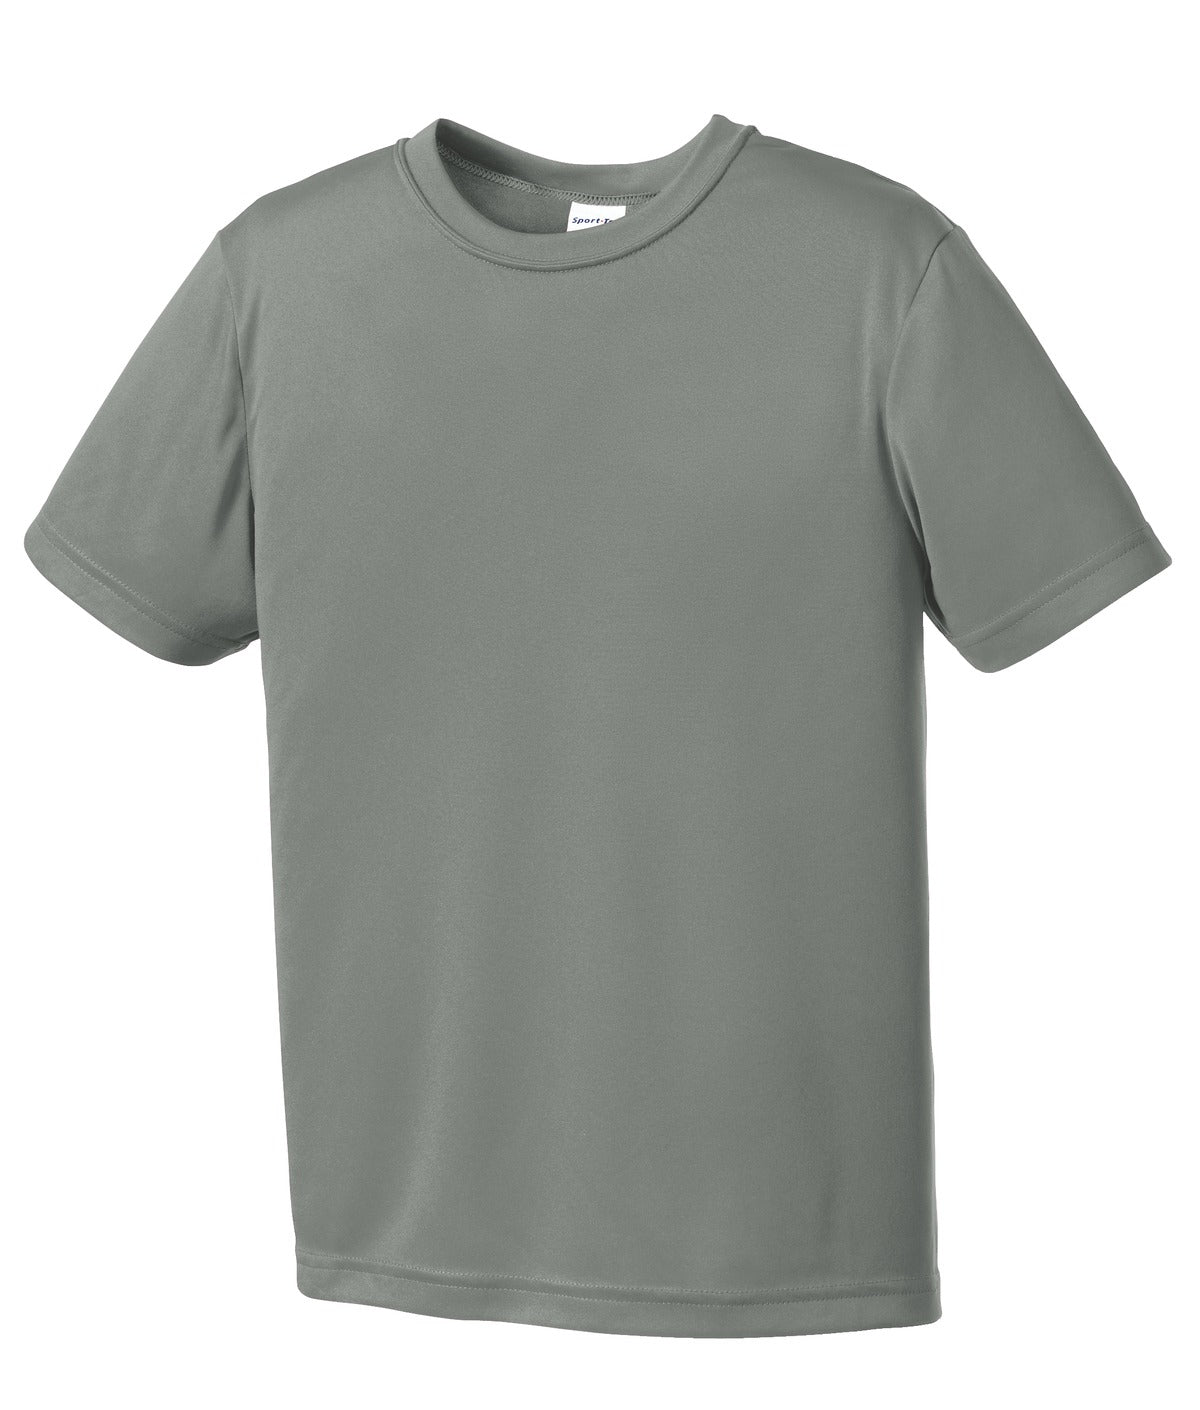 Sport-Tek Youth PosiCharge Competitor™ Tee. YST350